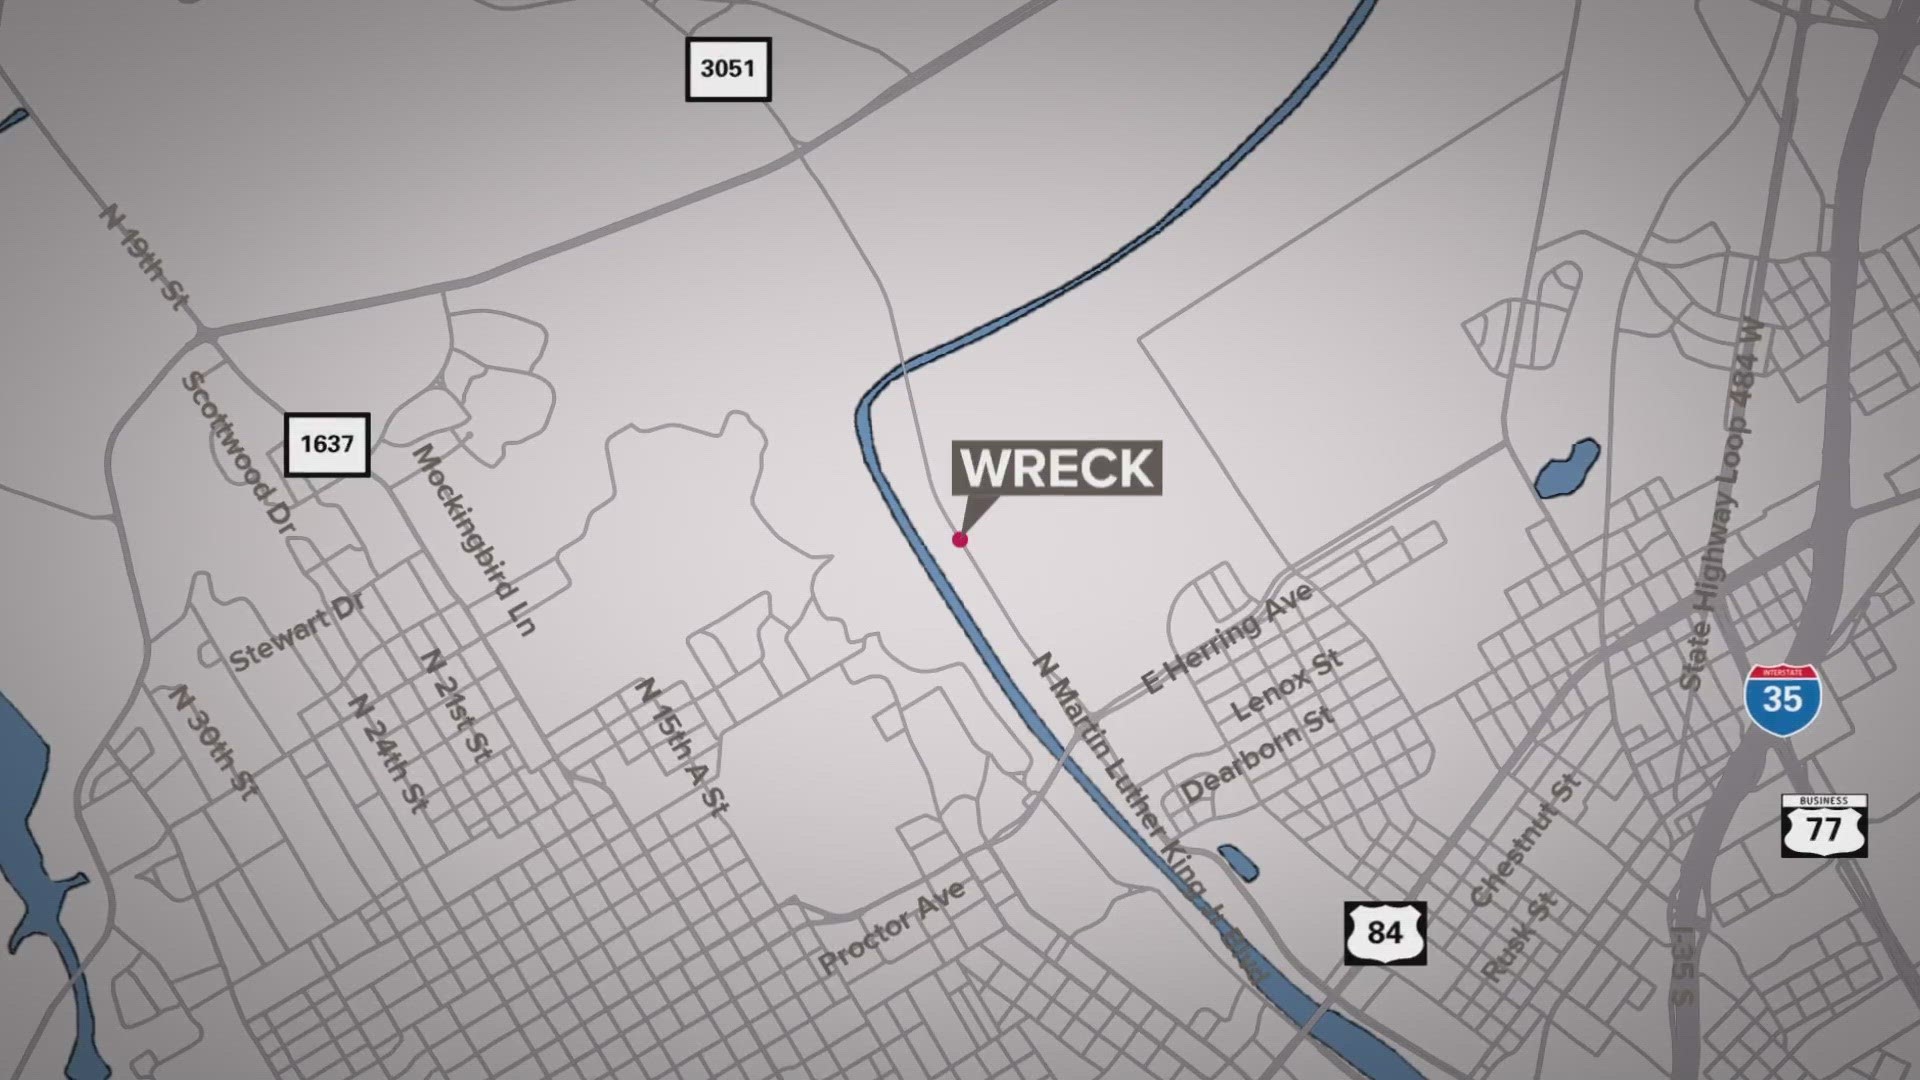 Waco police said the motorcycle driver and passenger were killed in the crash.